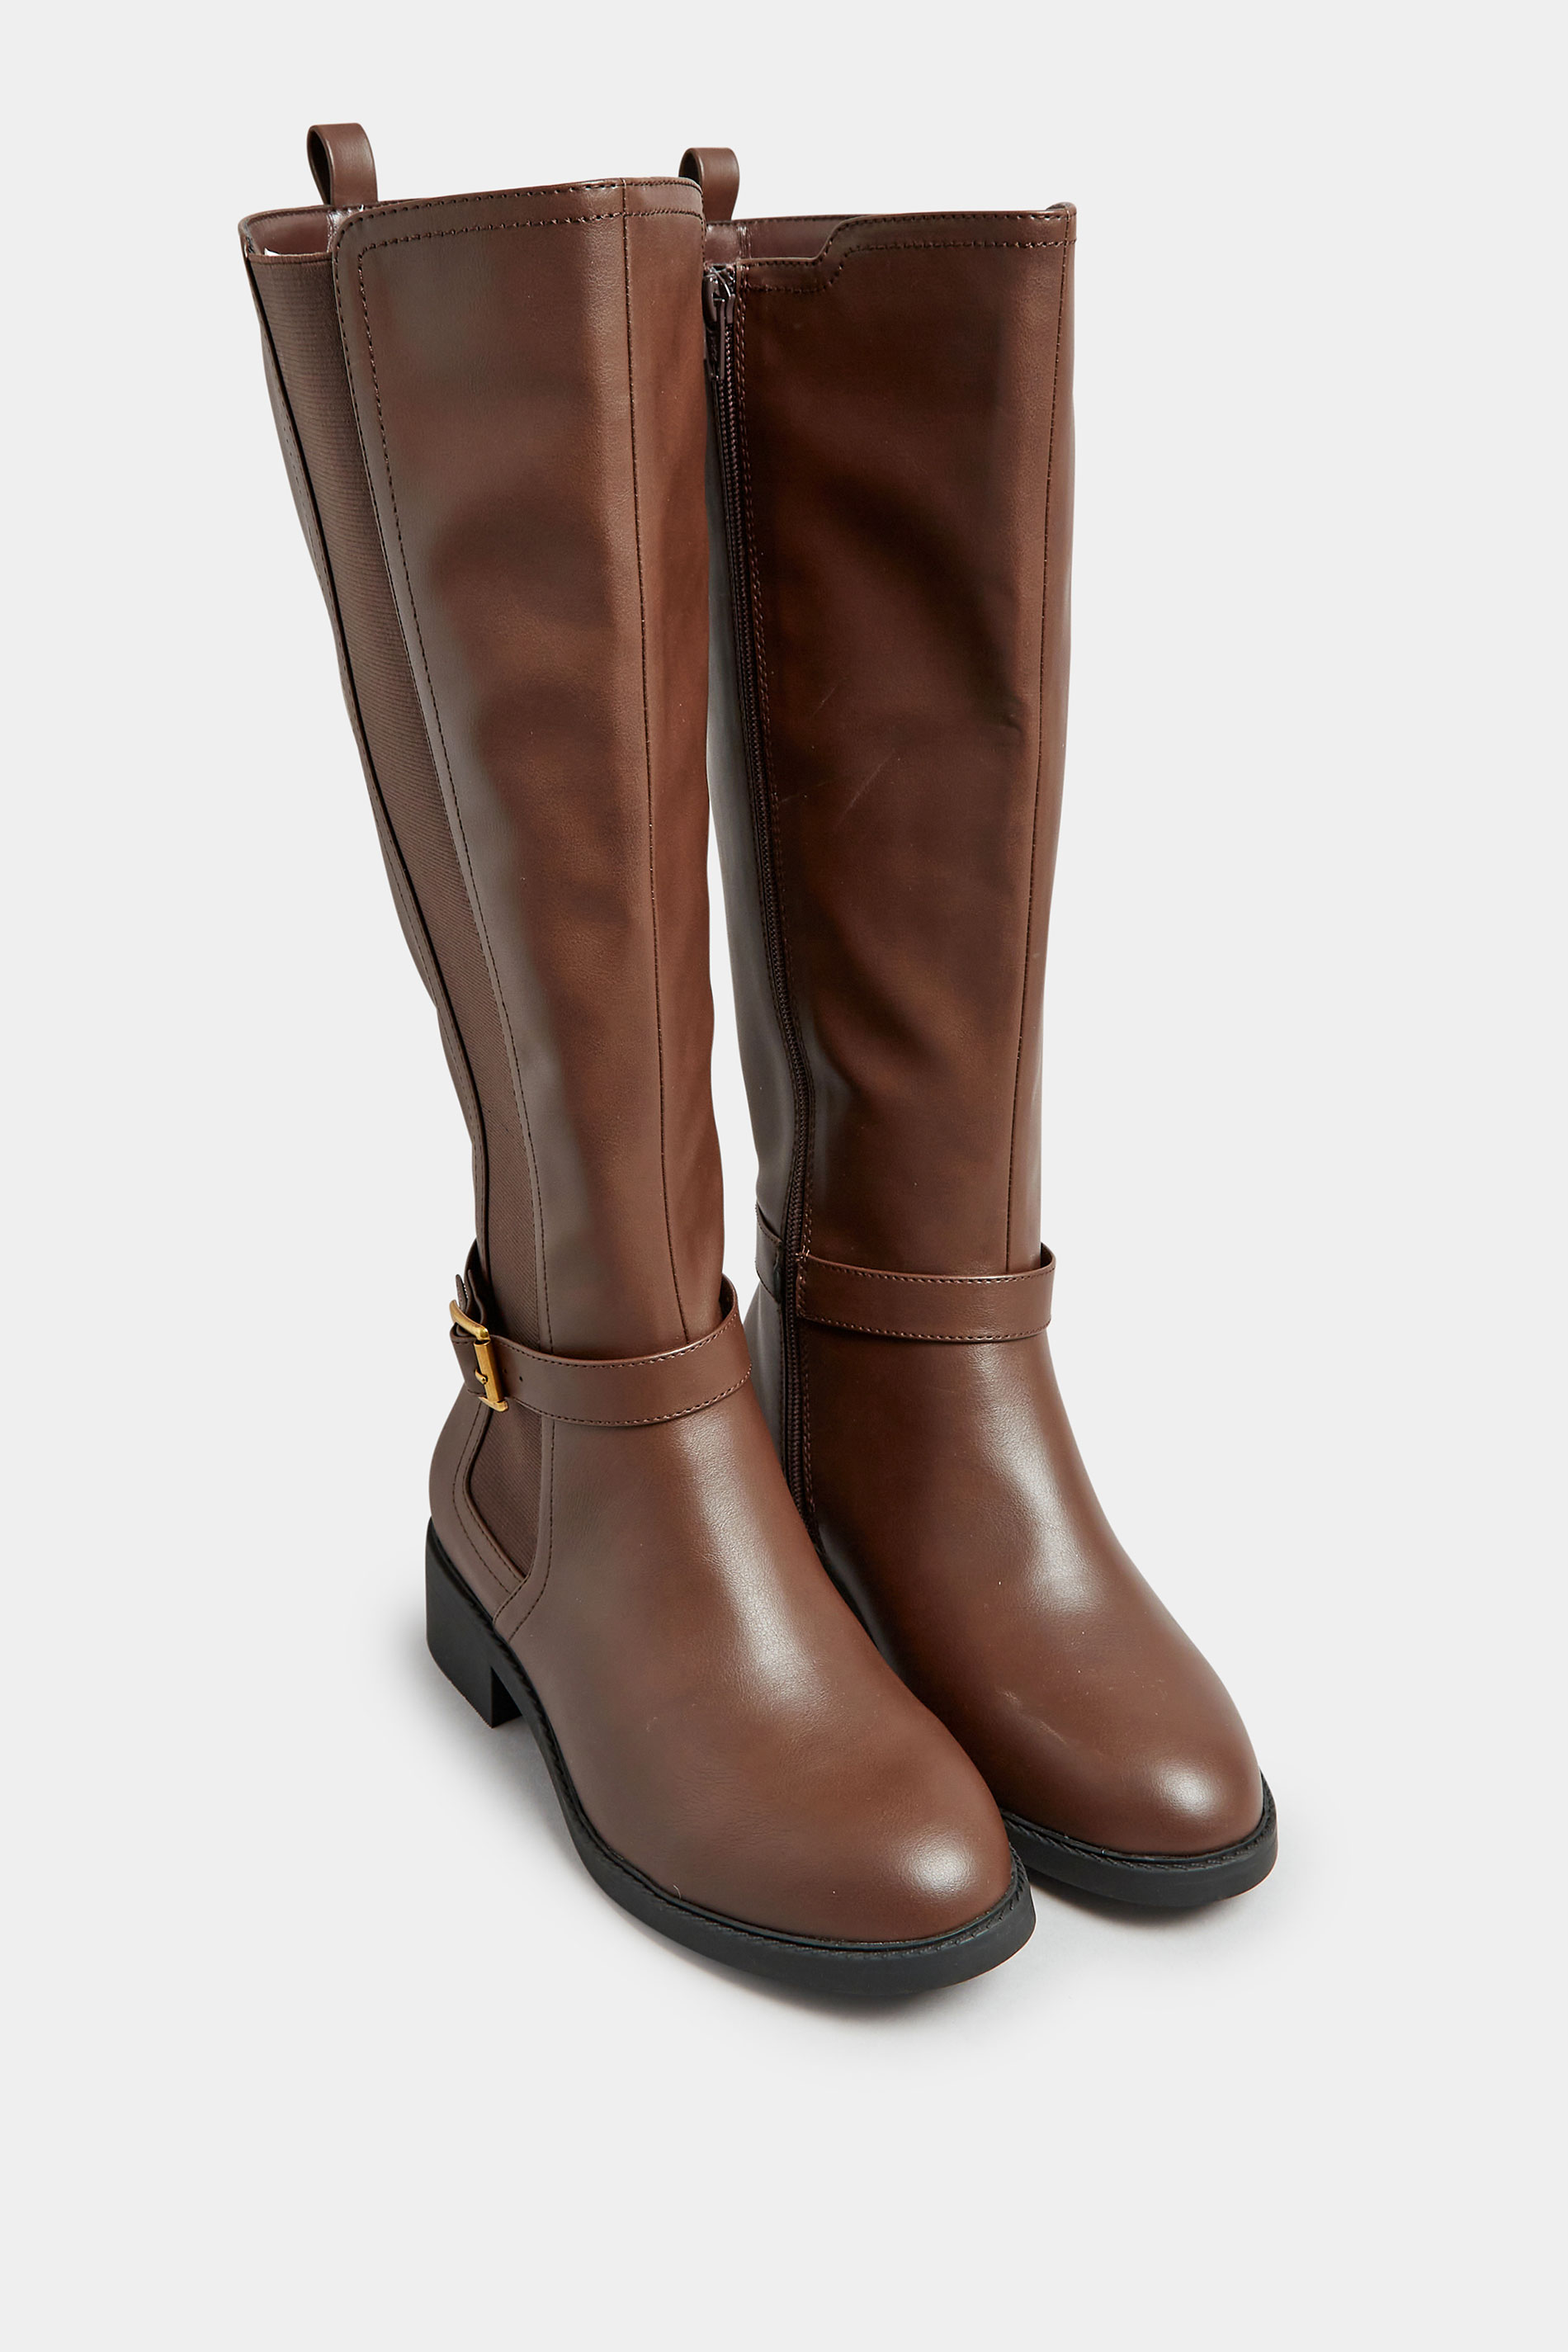 LIMITED COLLECTION Brown Strap Knee High Boot In Extra Wide EEE Fit | Yours Clothing 2